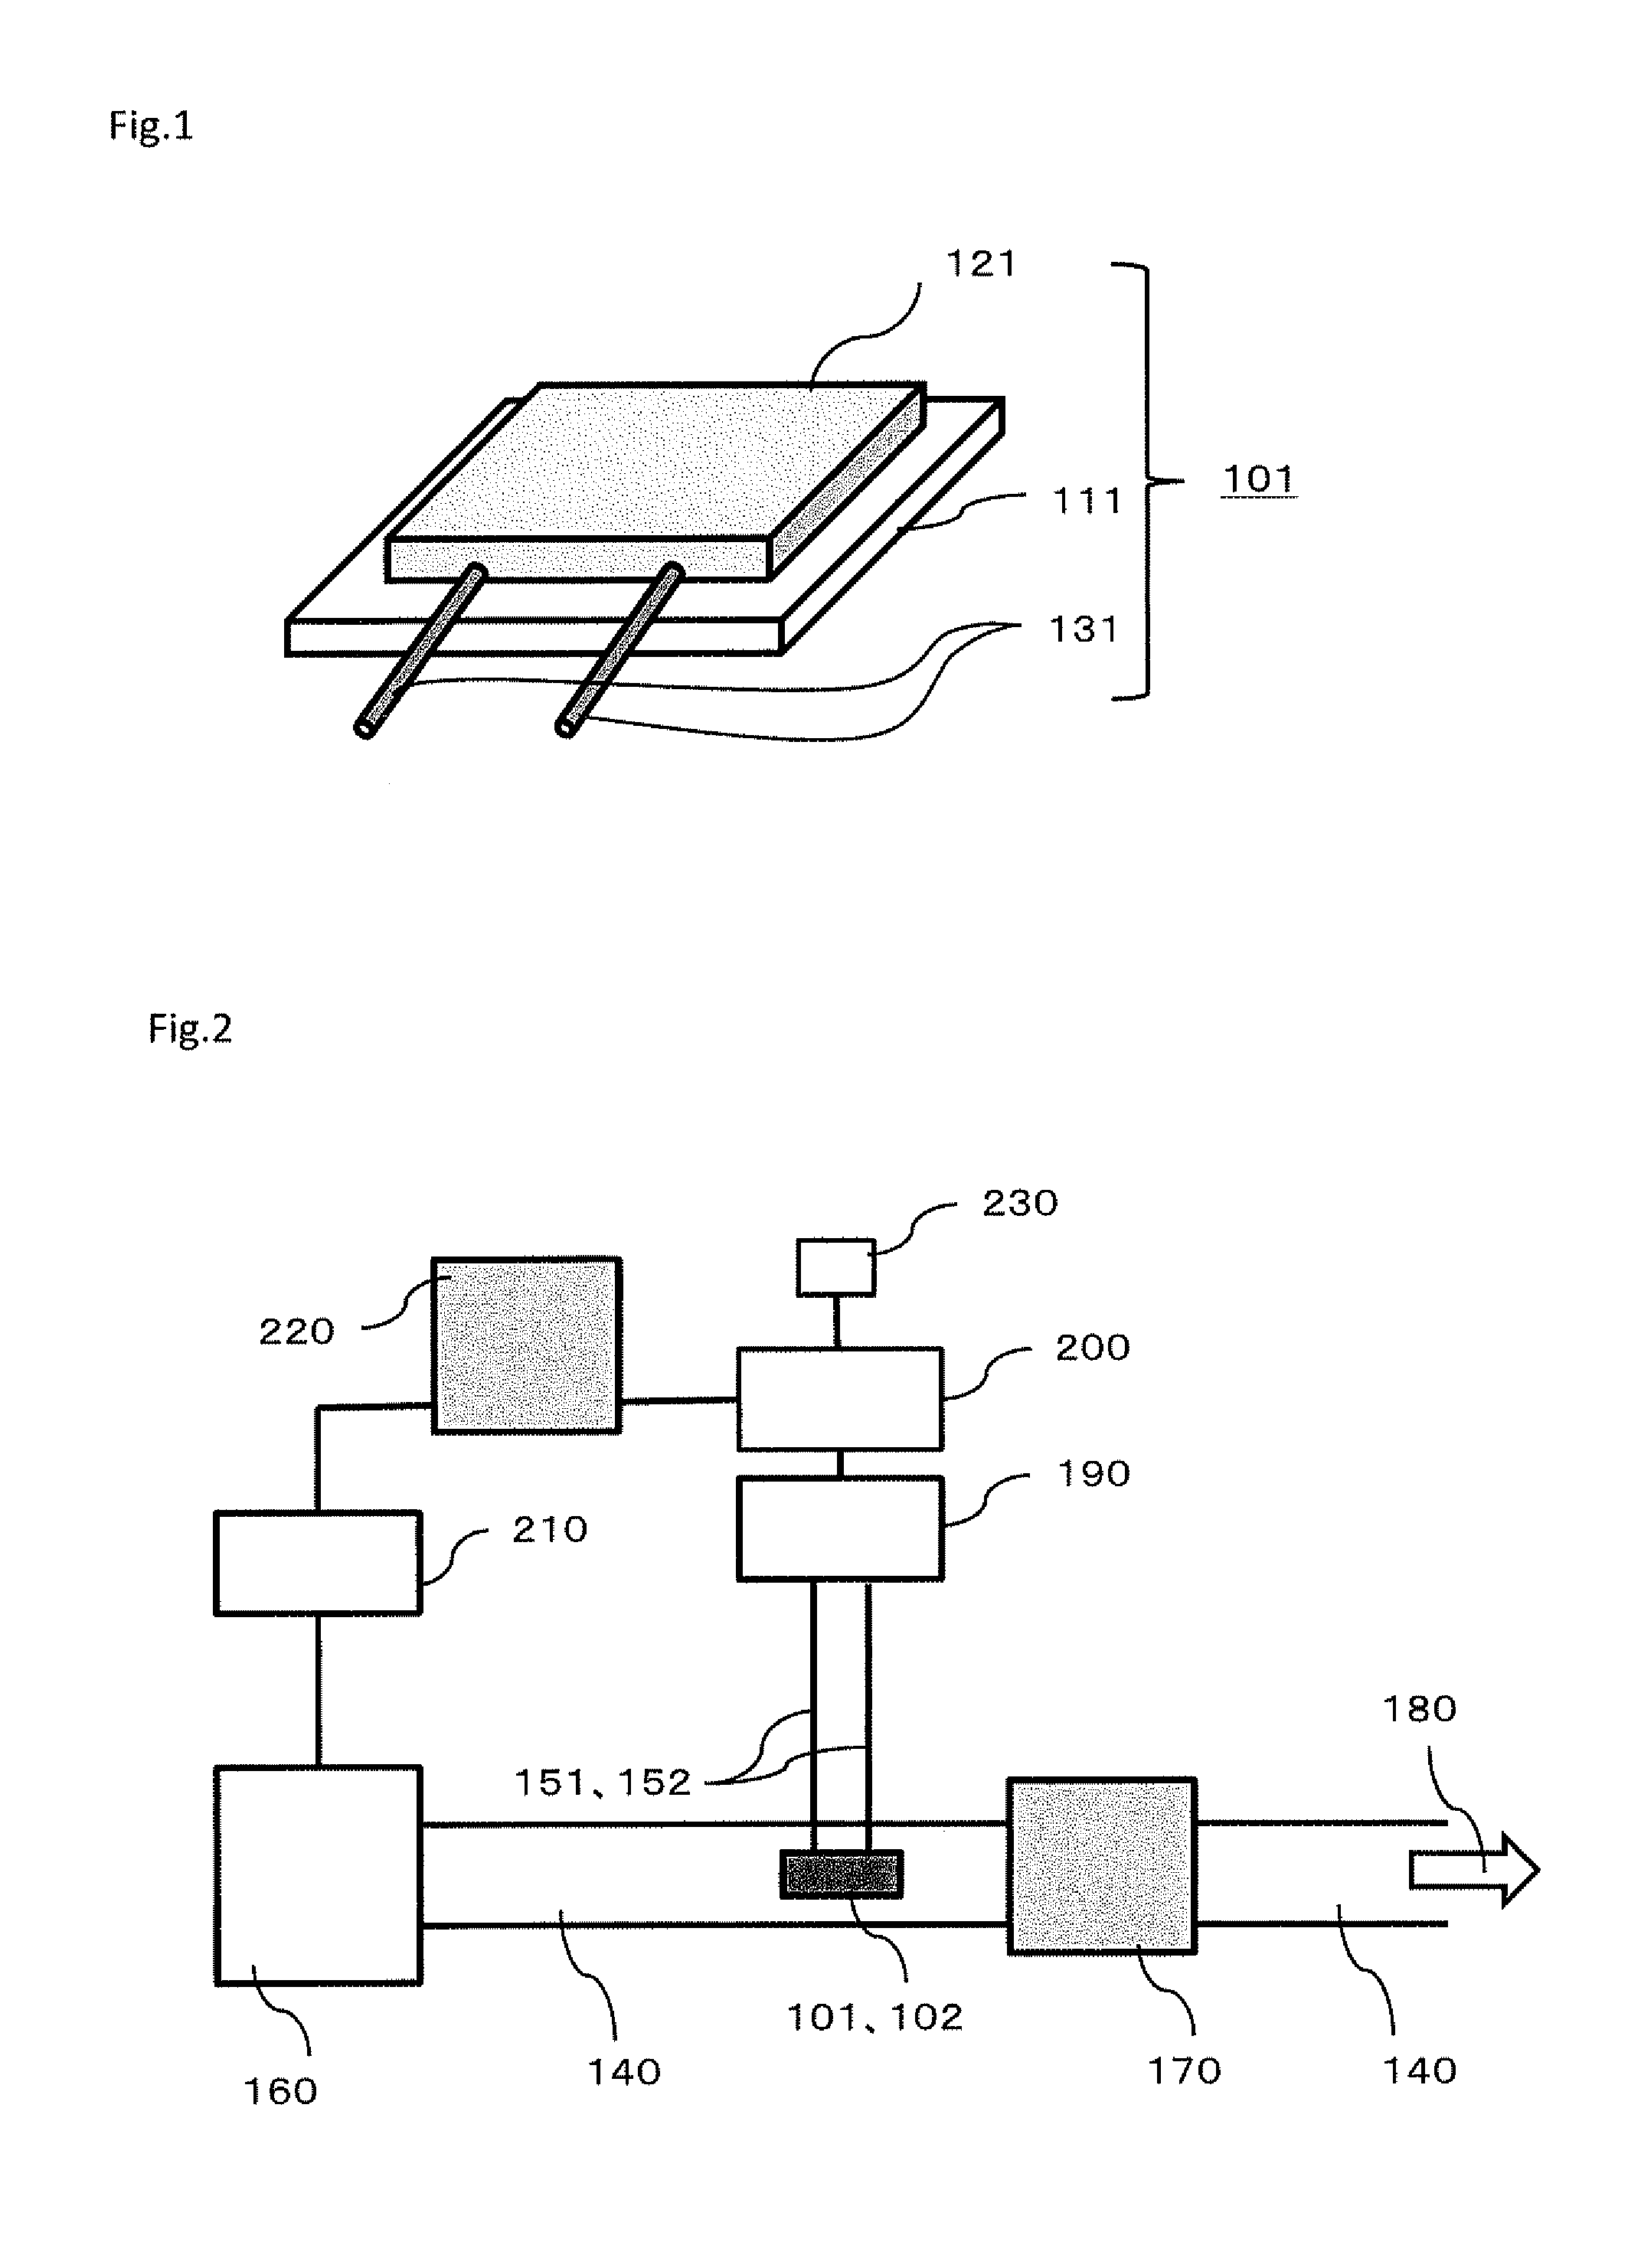 Catalyst deterioration diagnosis method, method for purification of exhaust gas using the diagnosis method, catalyst deterioration diagnosis apparatus, and apparatus for purification of exhaust gas using the diagnosis apparatus